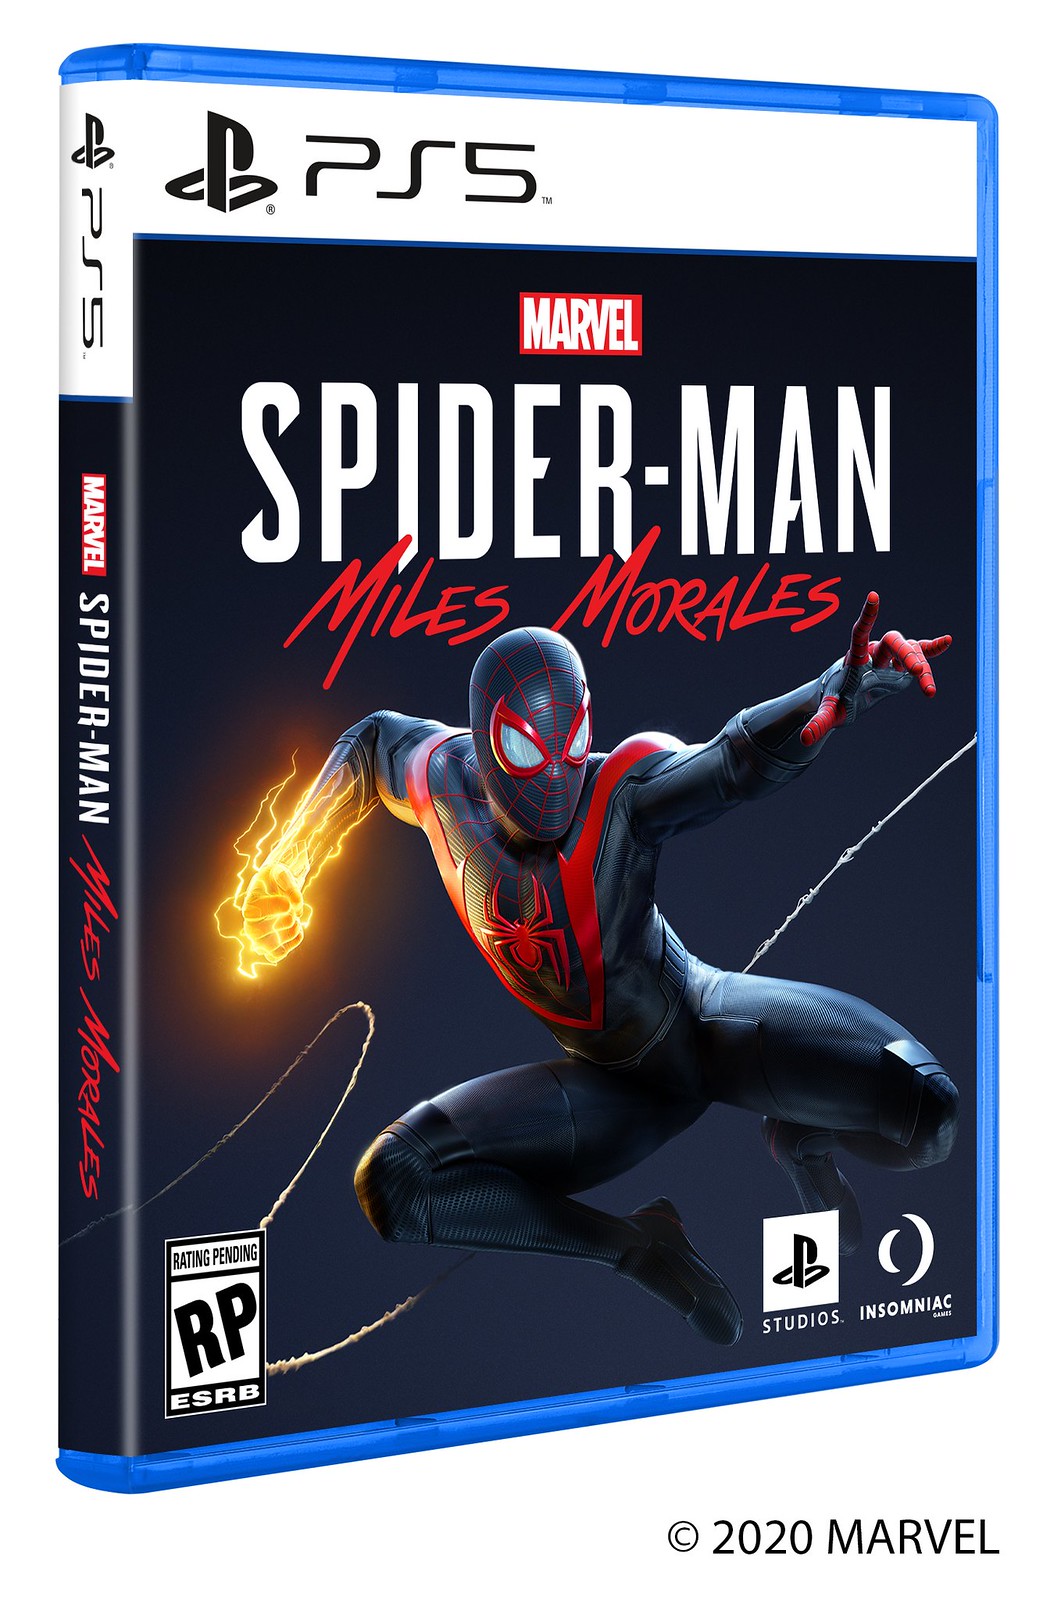 PS5 physical game cases spider-man miles morales box art